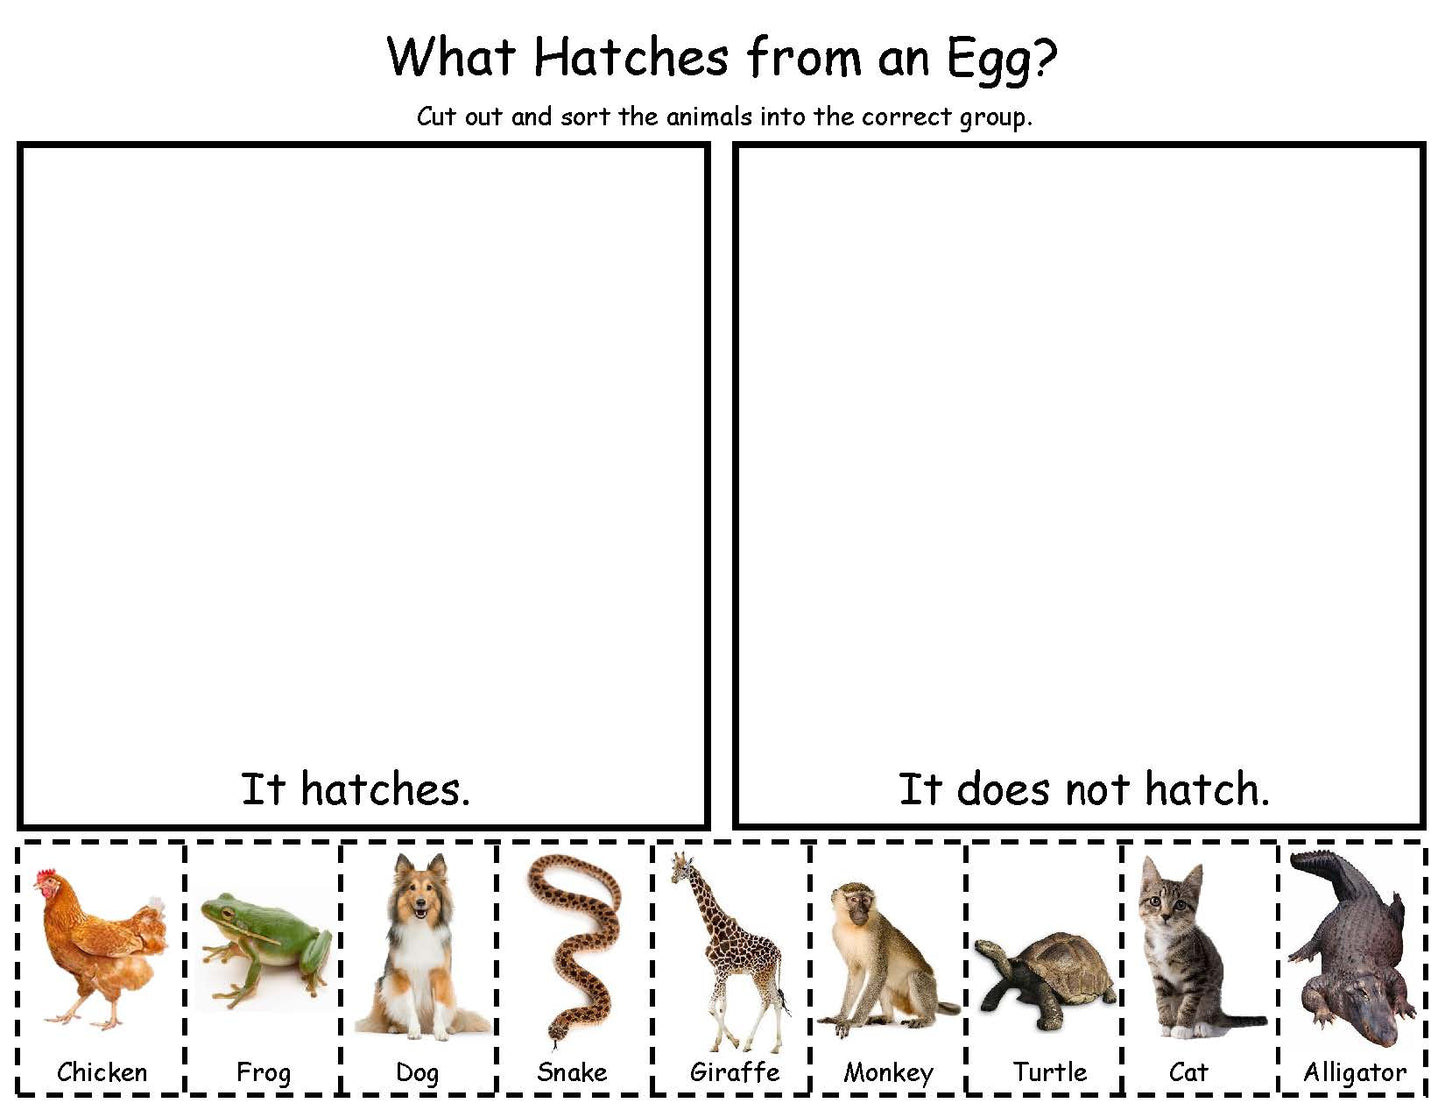 What Animals Hatch from Eggs?